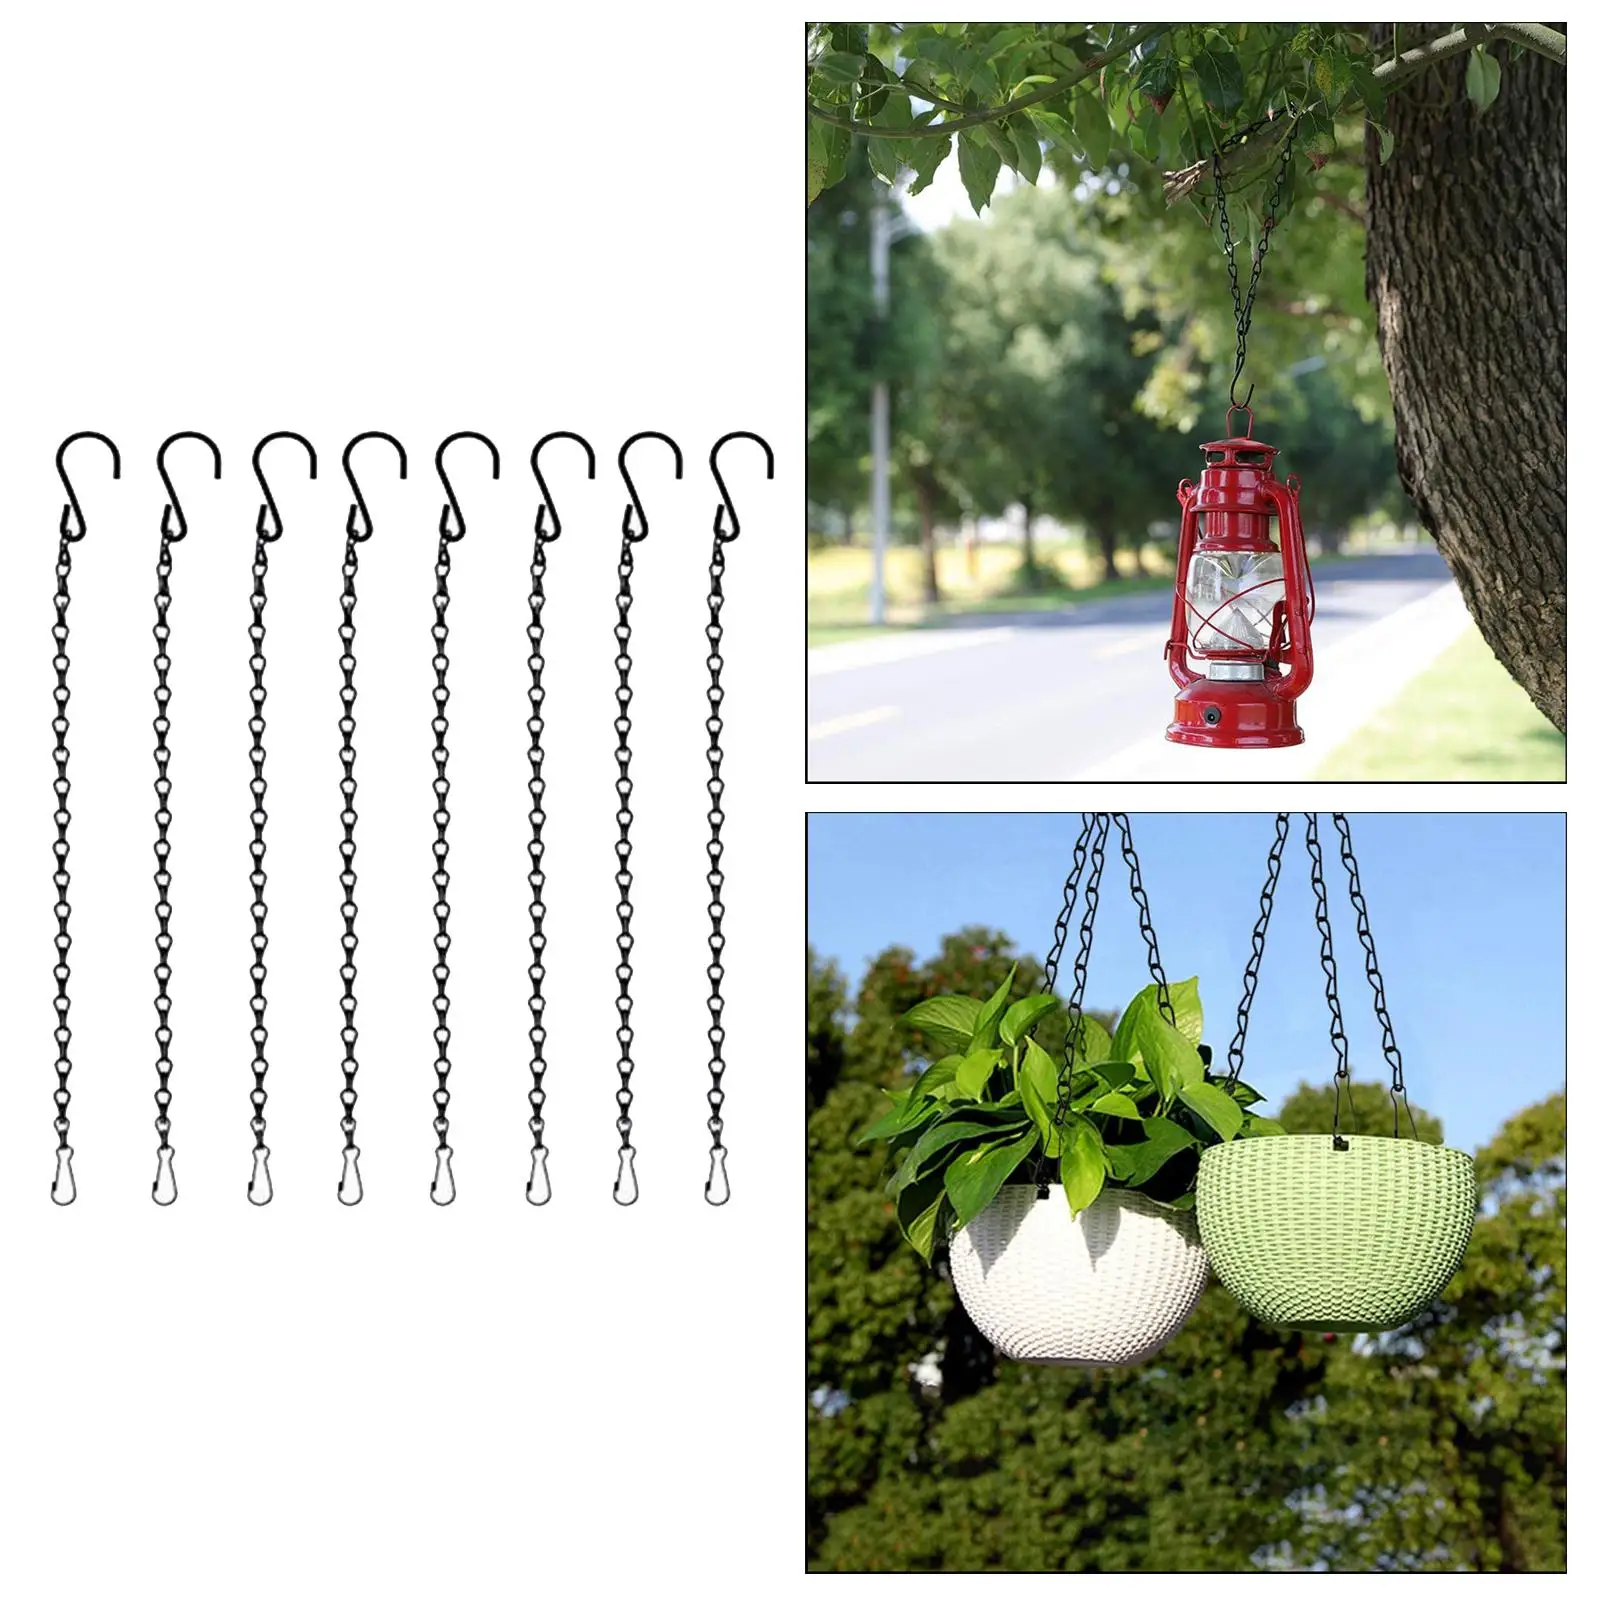 8 Hanging Chain 19.7inch Garden Plant Hangers with Clip & Hook, Easy to Install and Remove